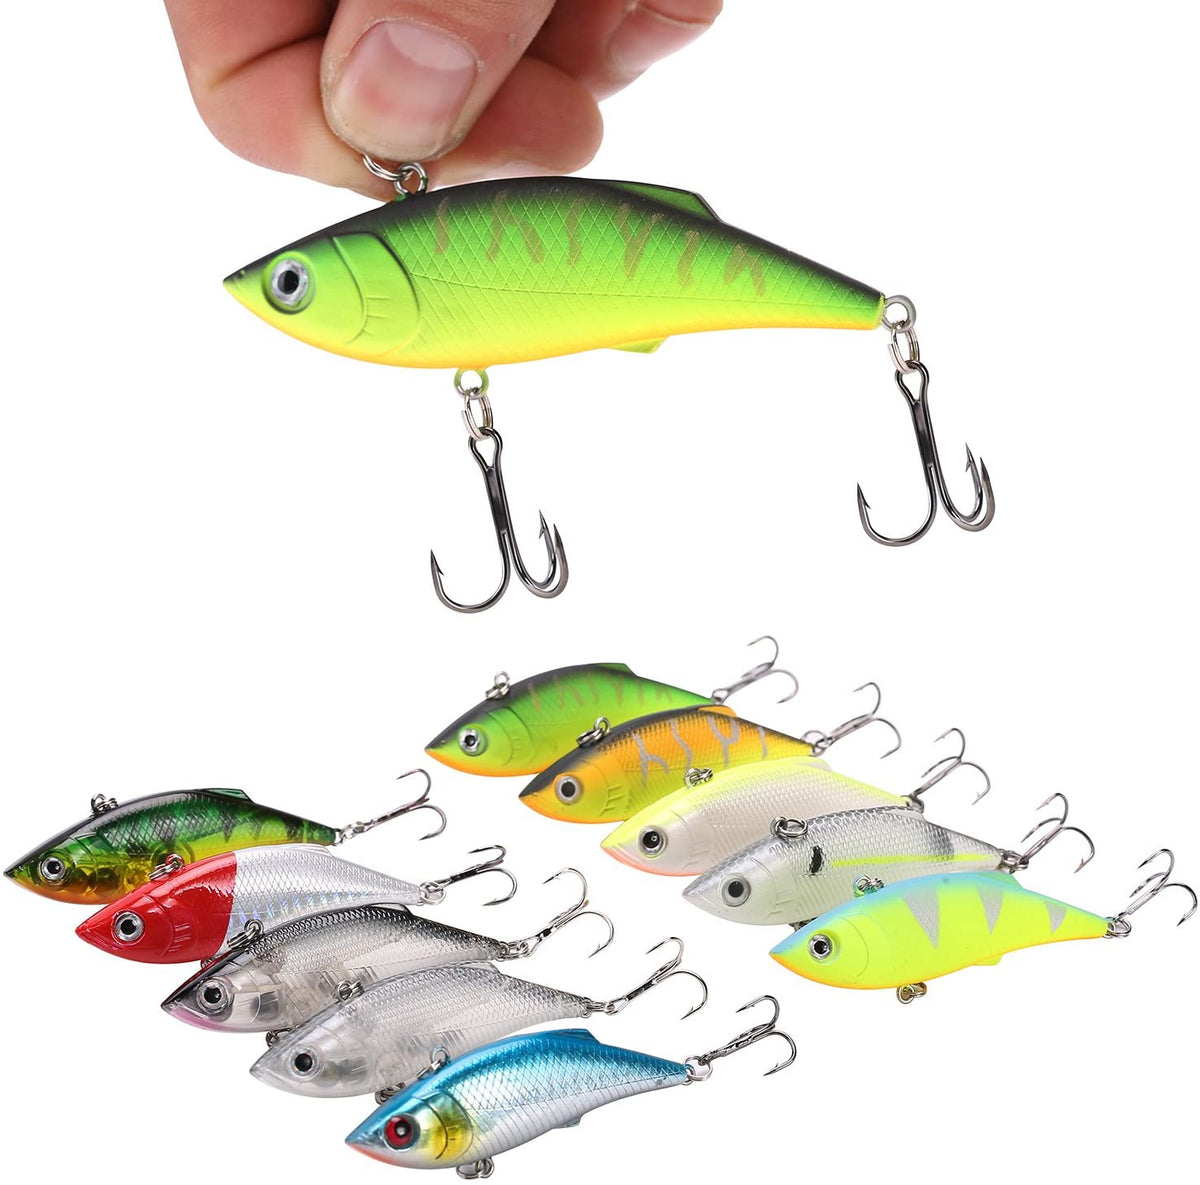 Sougayilang Fishing Lures Hard Bait Minnow Crankbait with Treble Hook  Life-Like Swimbait Fishing Bait Deep Diver Lure Sinking Lure for Bass Trout  Fishing Pack of 10PCS …, Baits & Scents 